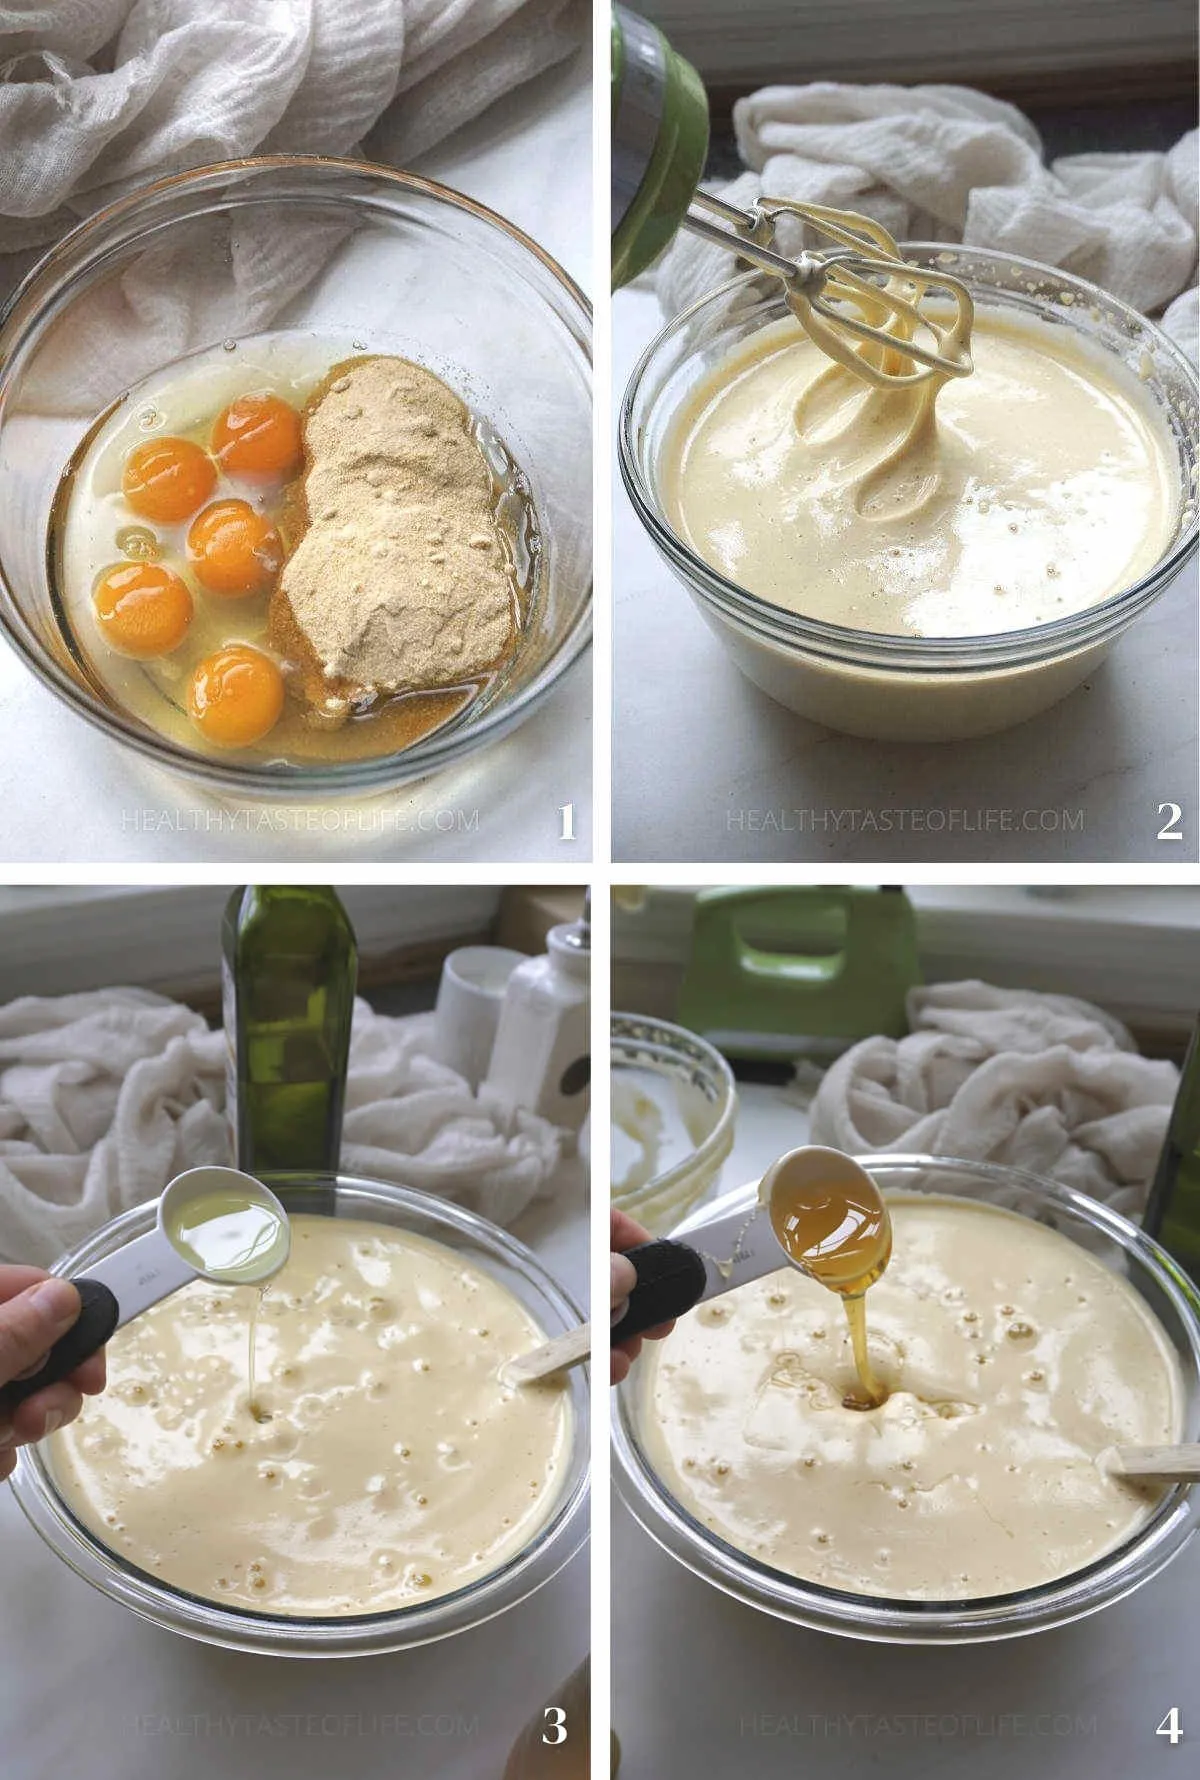 Process shots showing how to mix the eggs with sugar and then wet ingredients for a Greek walnut cake.